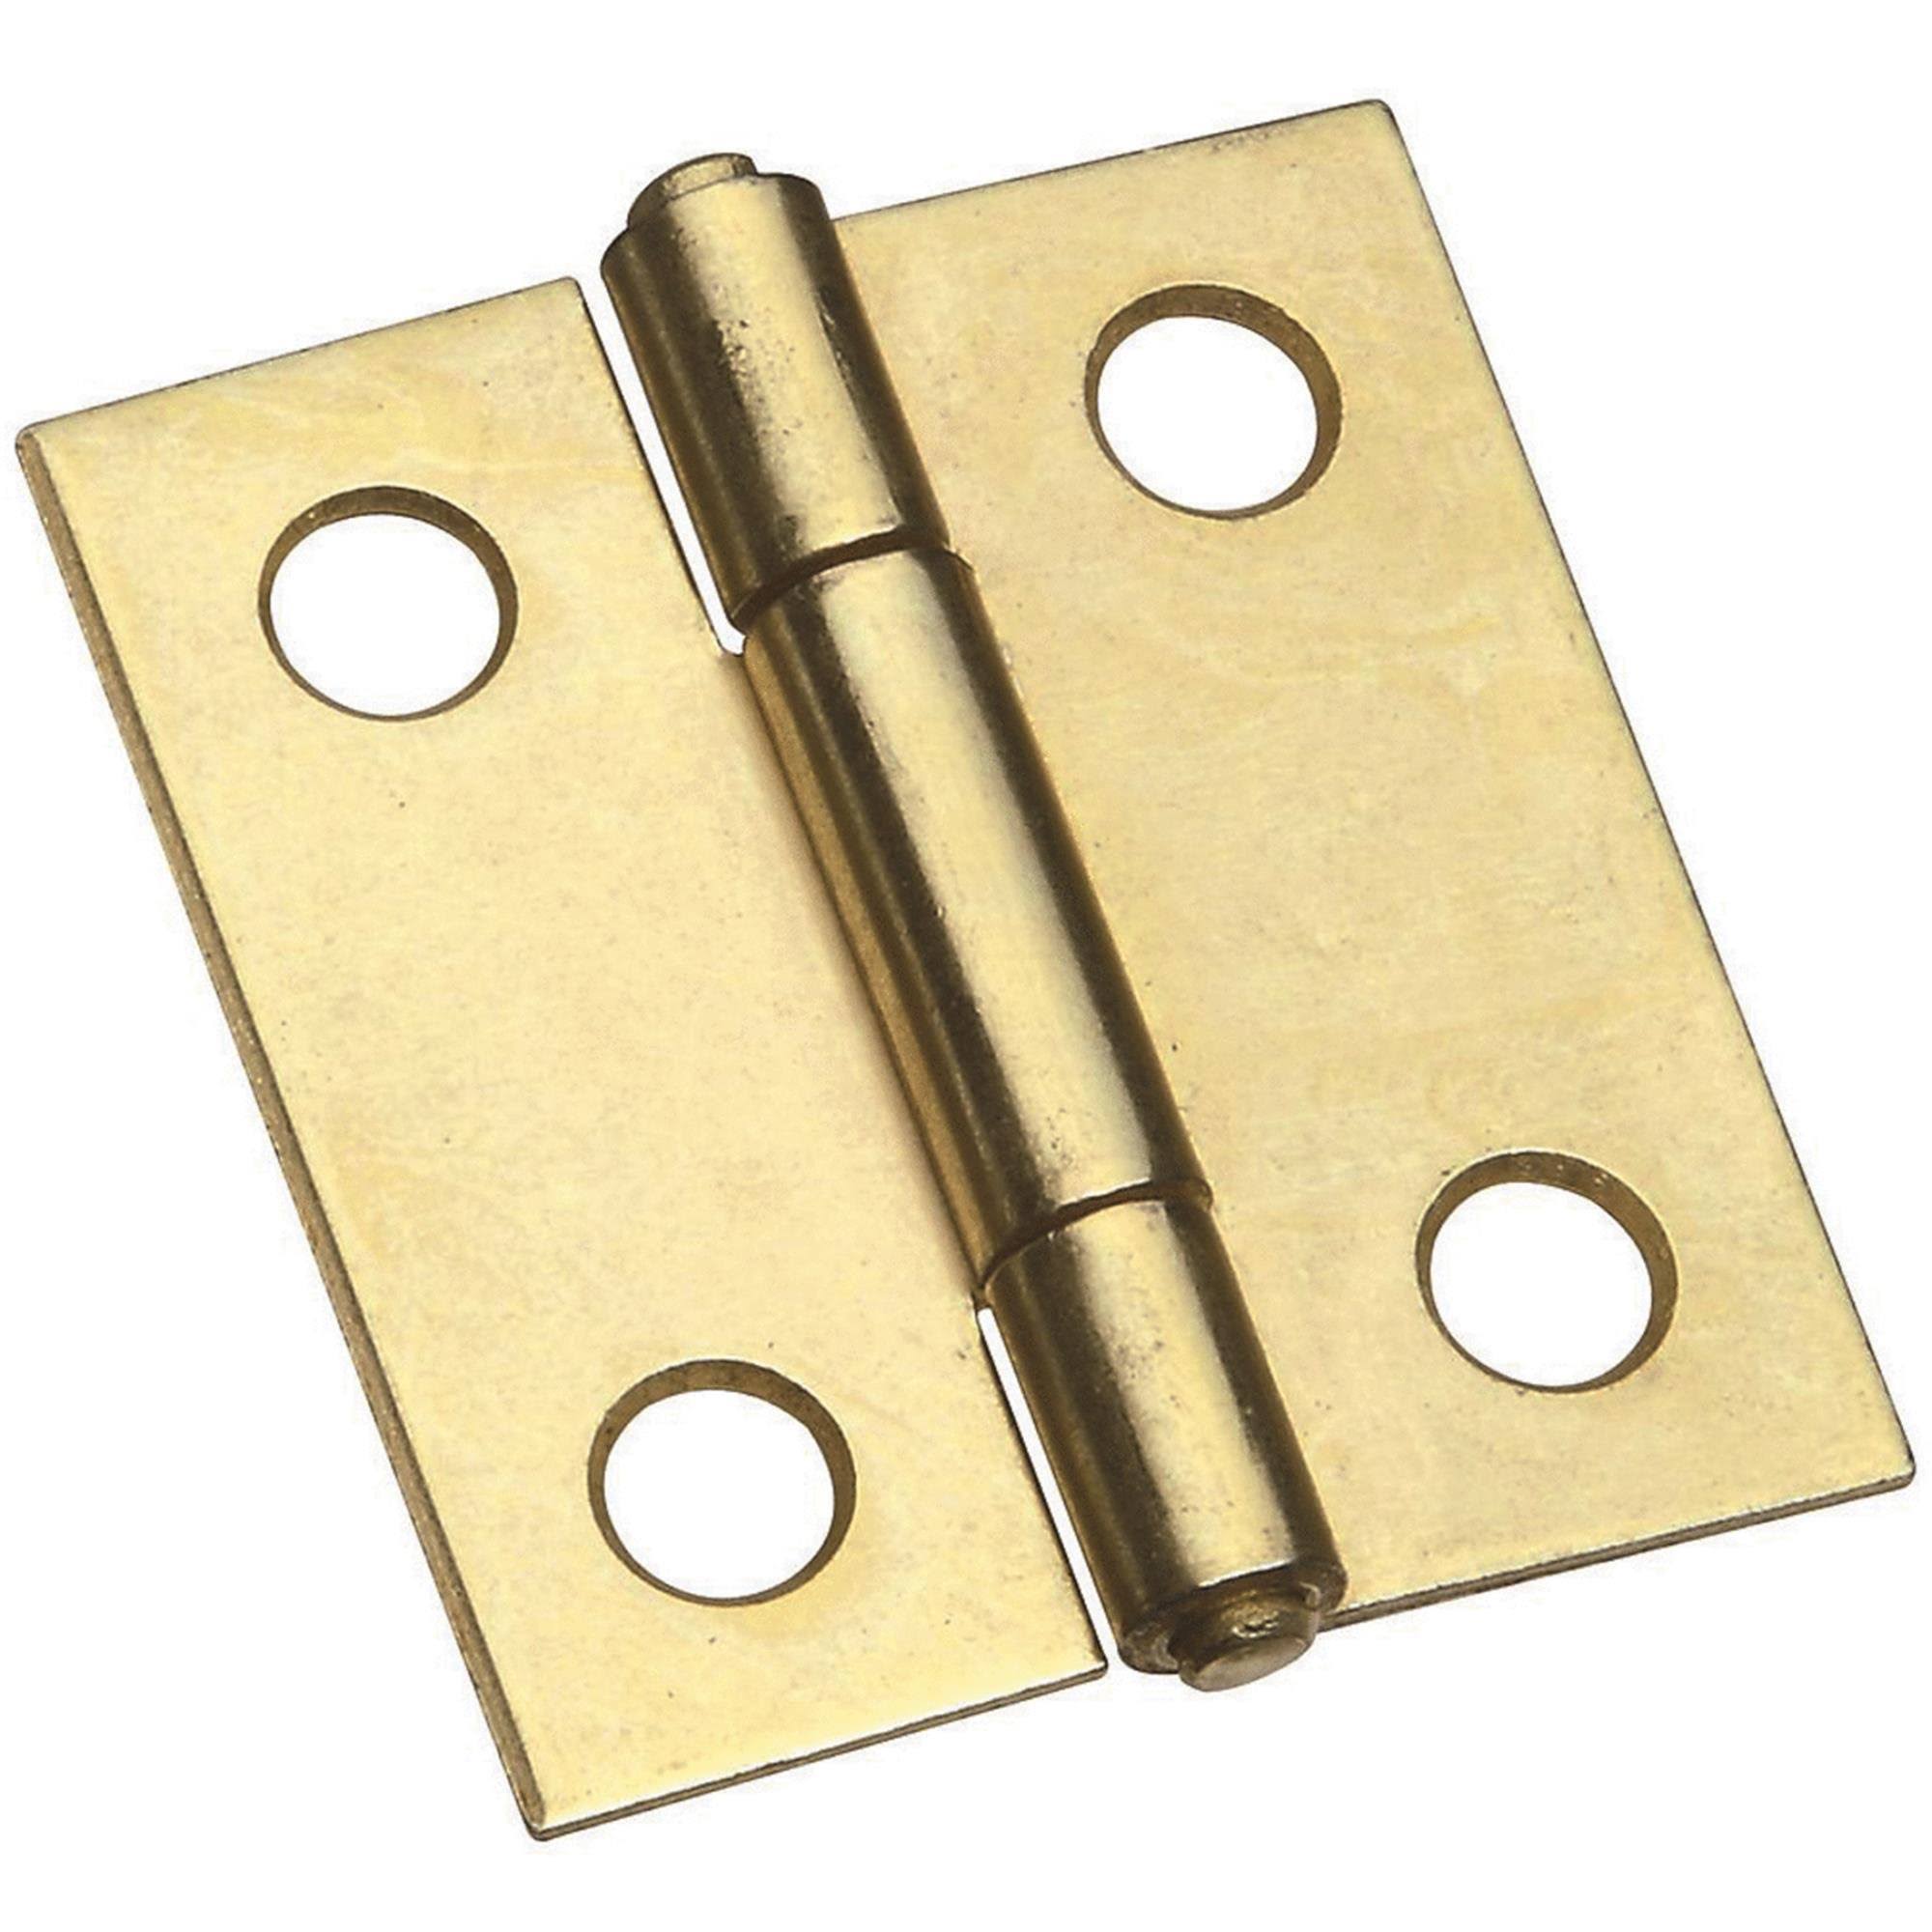 National Hardware Non-Removable Pin Hinges - 2pk